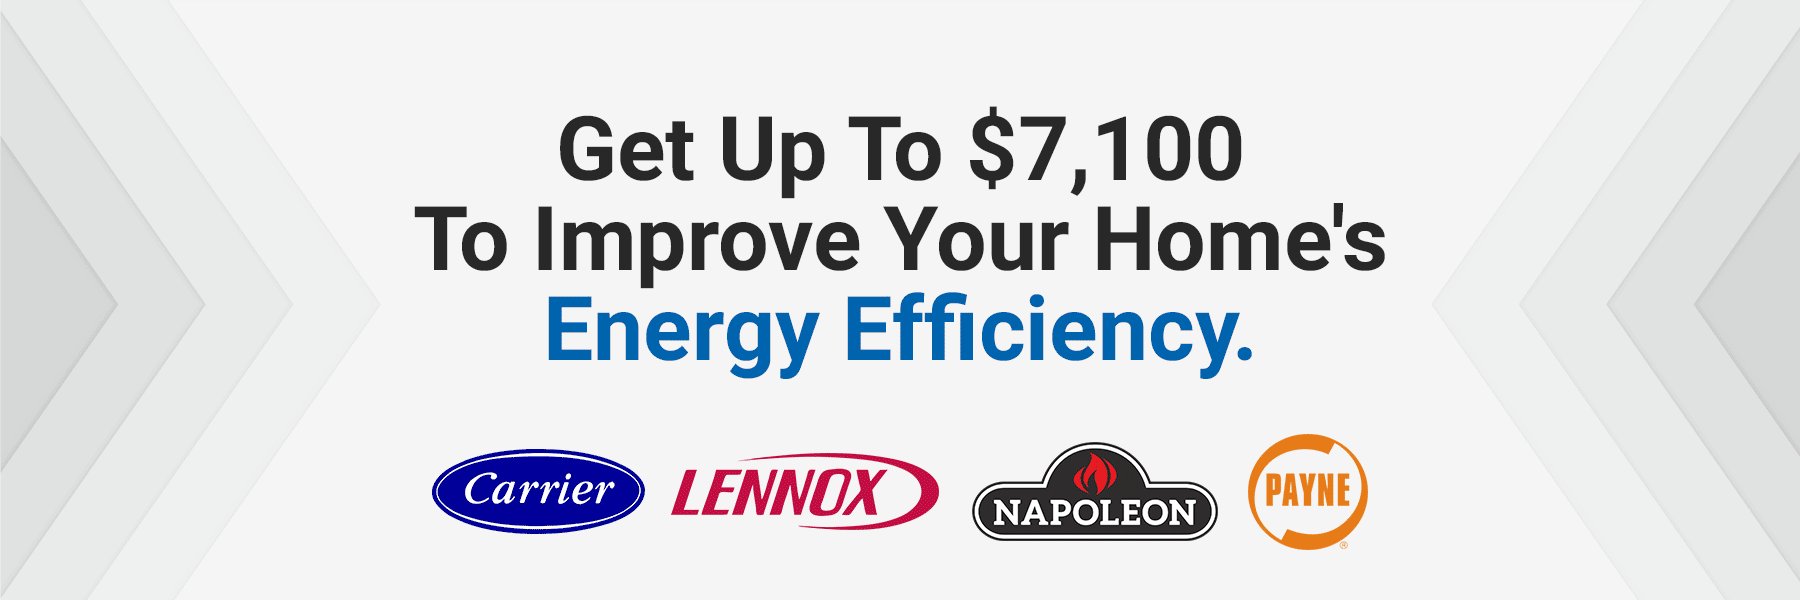 Ontario Napoleon NH25 Series Ductless Heat Pump incentives